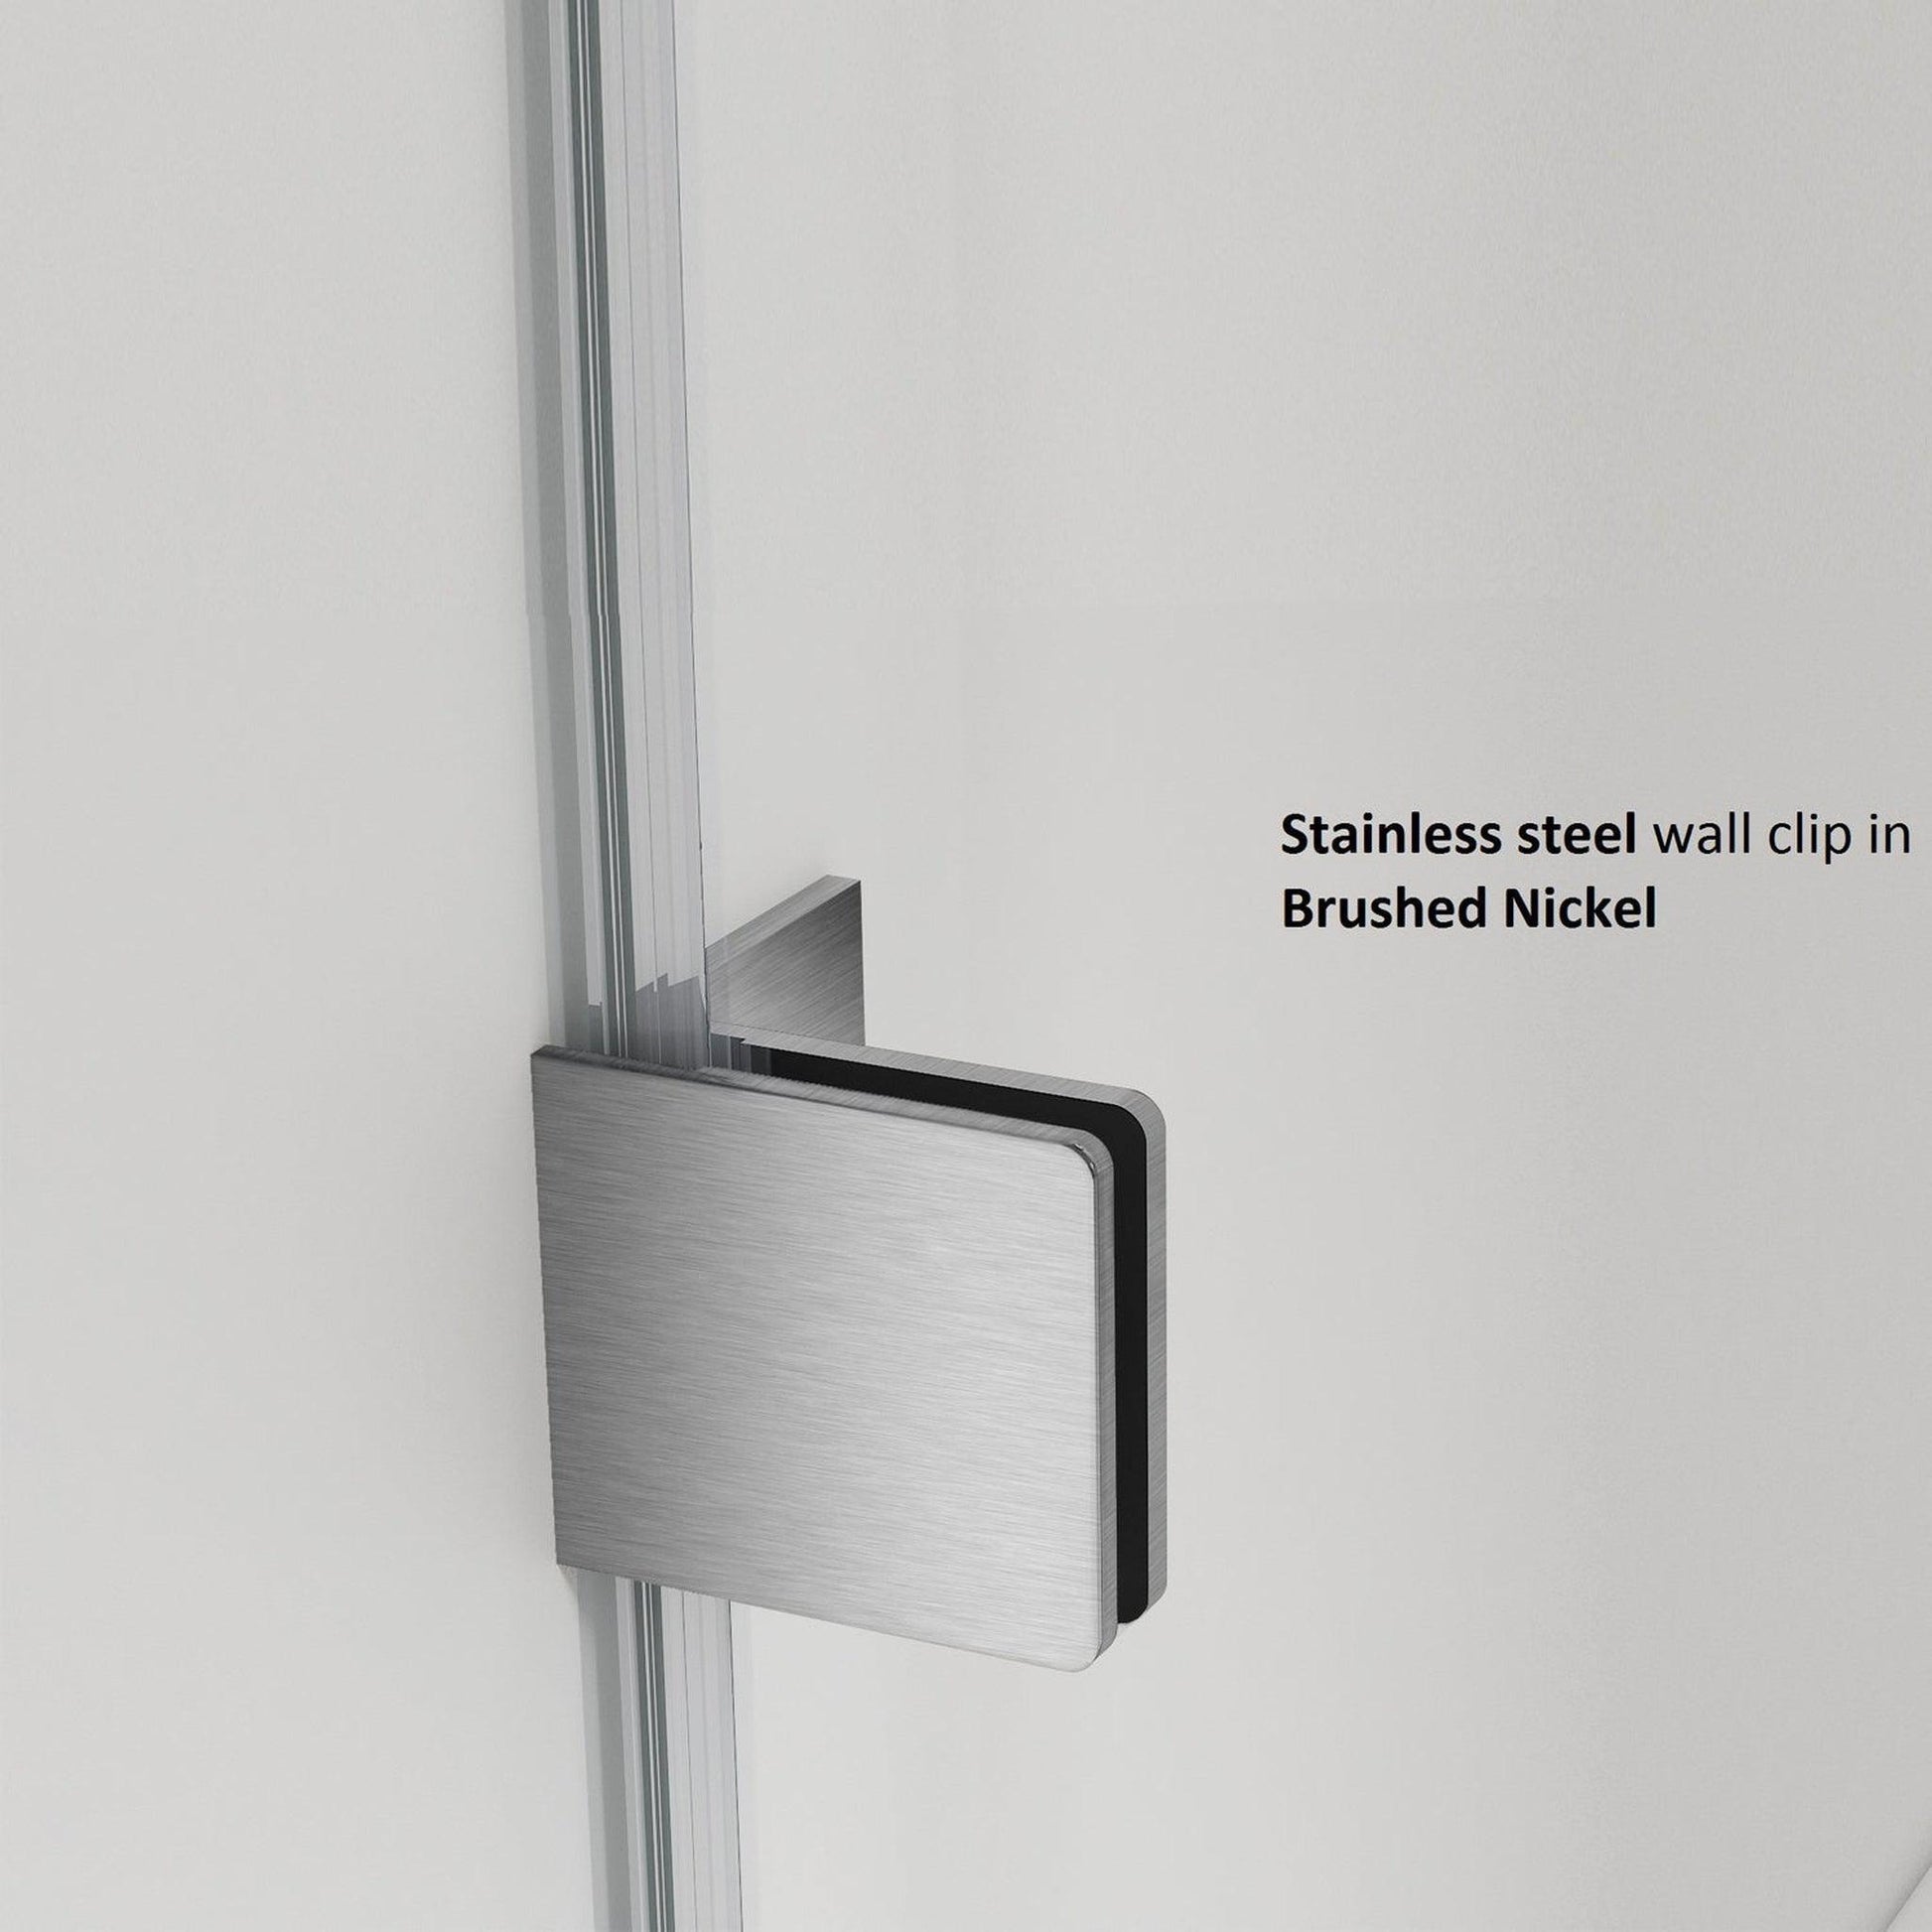 Vinnova Milano 36" x 72" Brushed Nickel In-line Hinged Frameless Shower Door With Fixed Glass on One Side